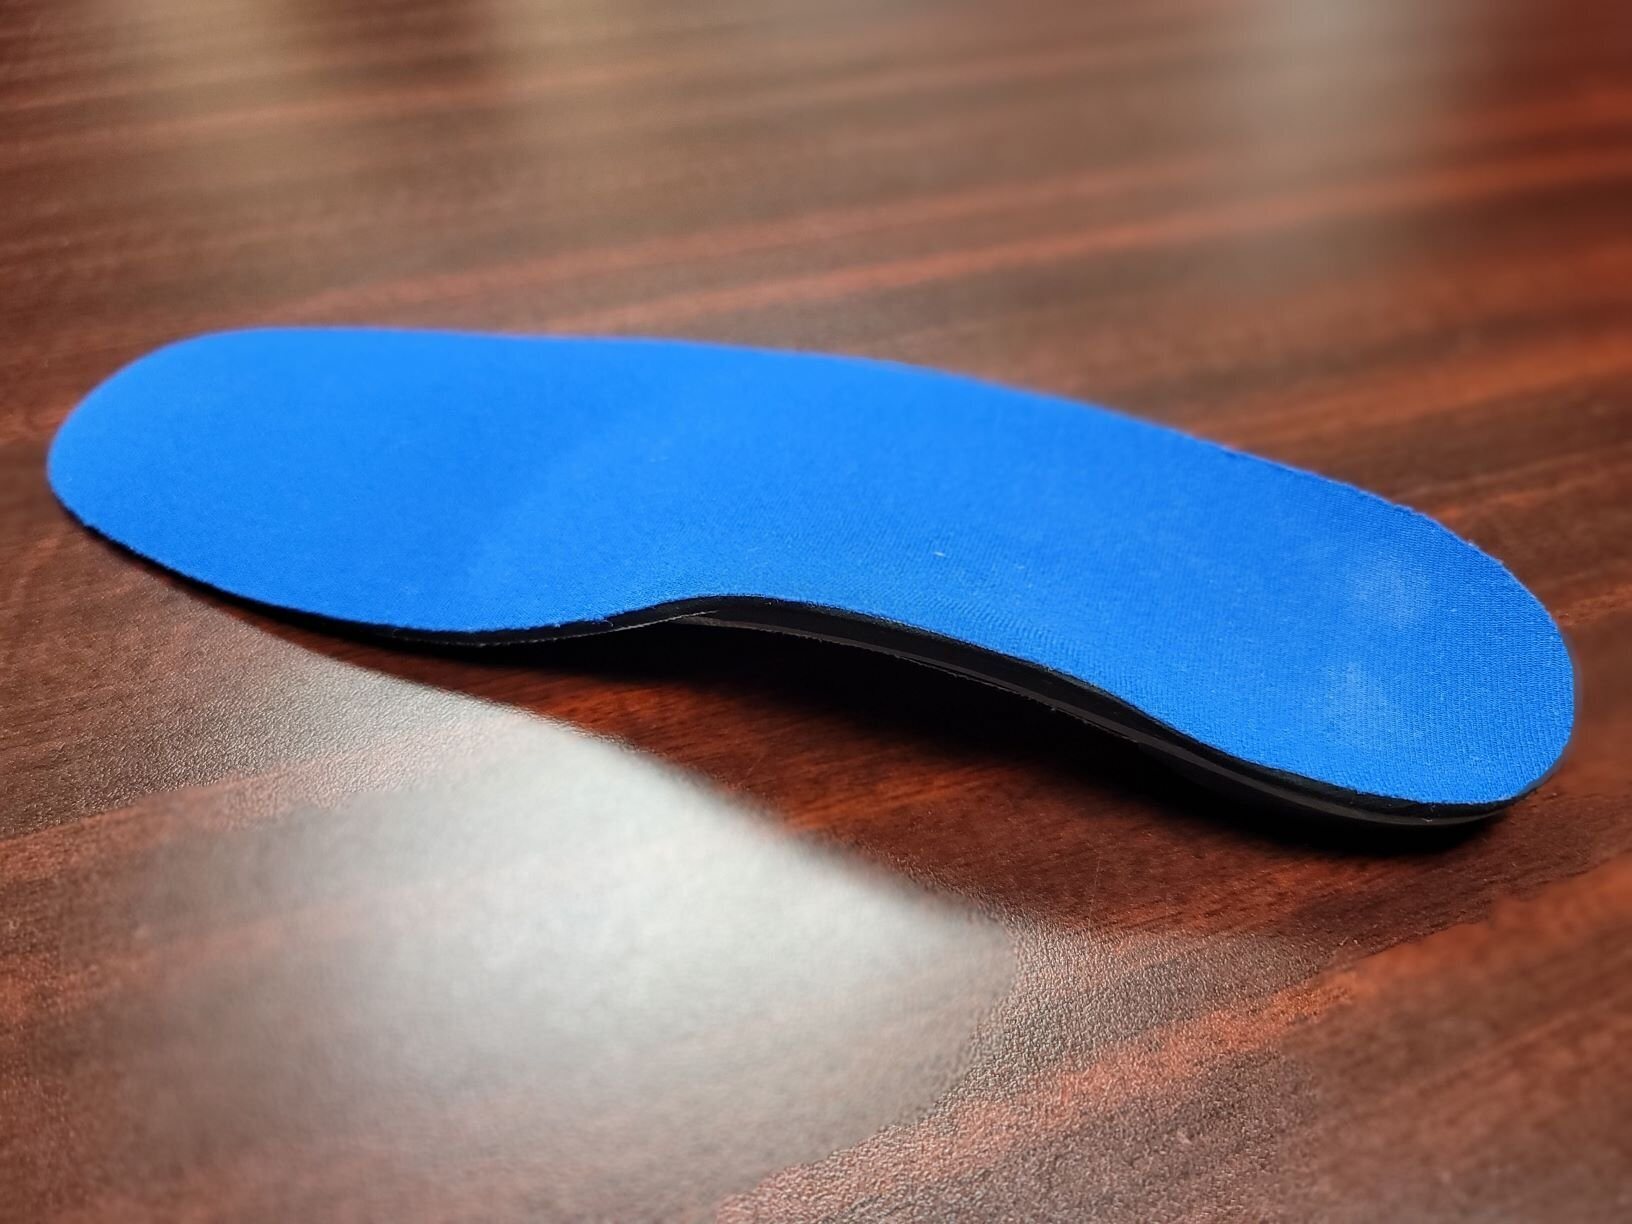 custom foot orthotic to insert into a shoe to support a flexible flat foot